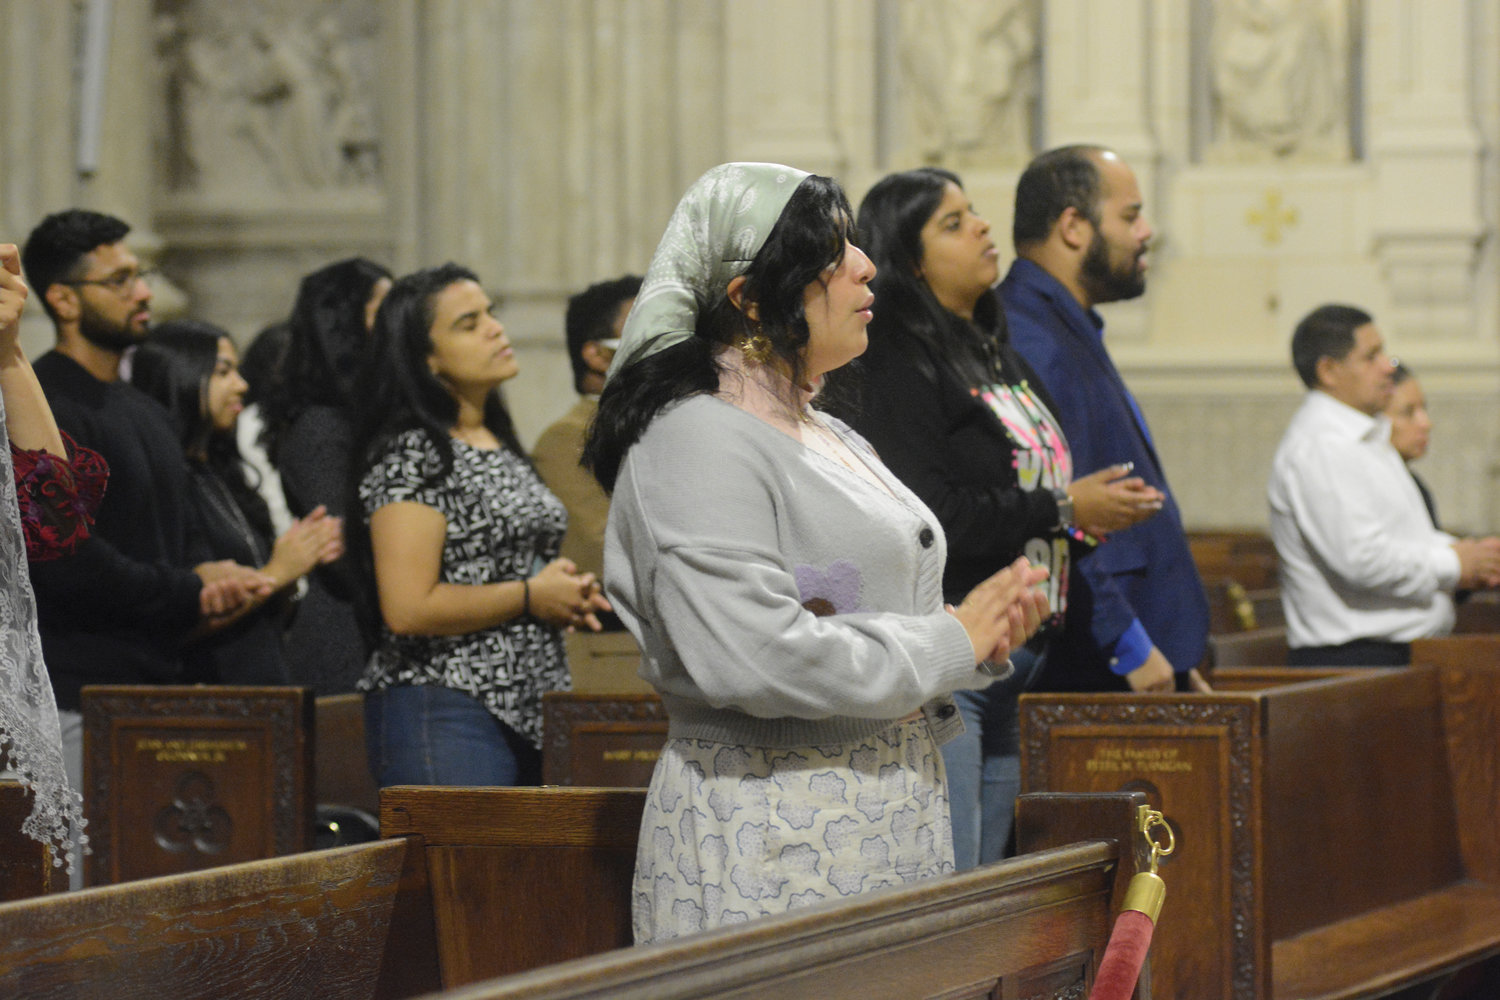 Members of the congregation prayerfully participate.